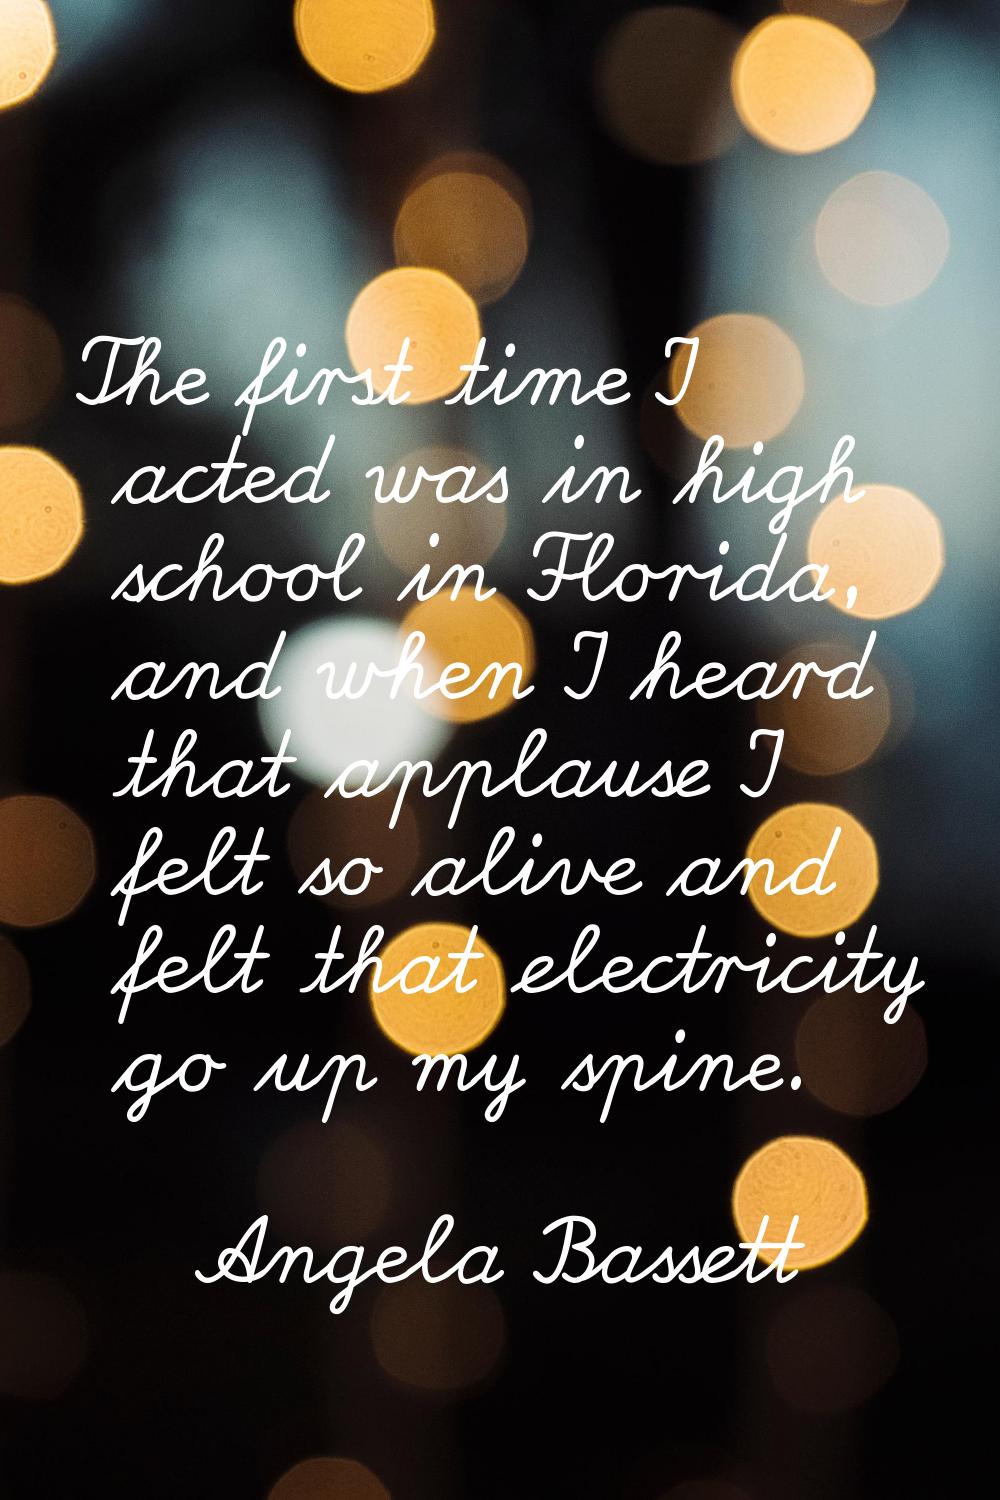 The first time I acted was in high school in Florida, and when I heard that applause I felt so aliv